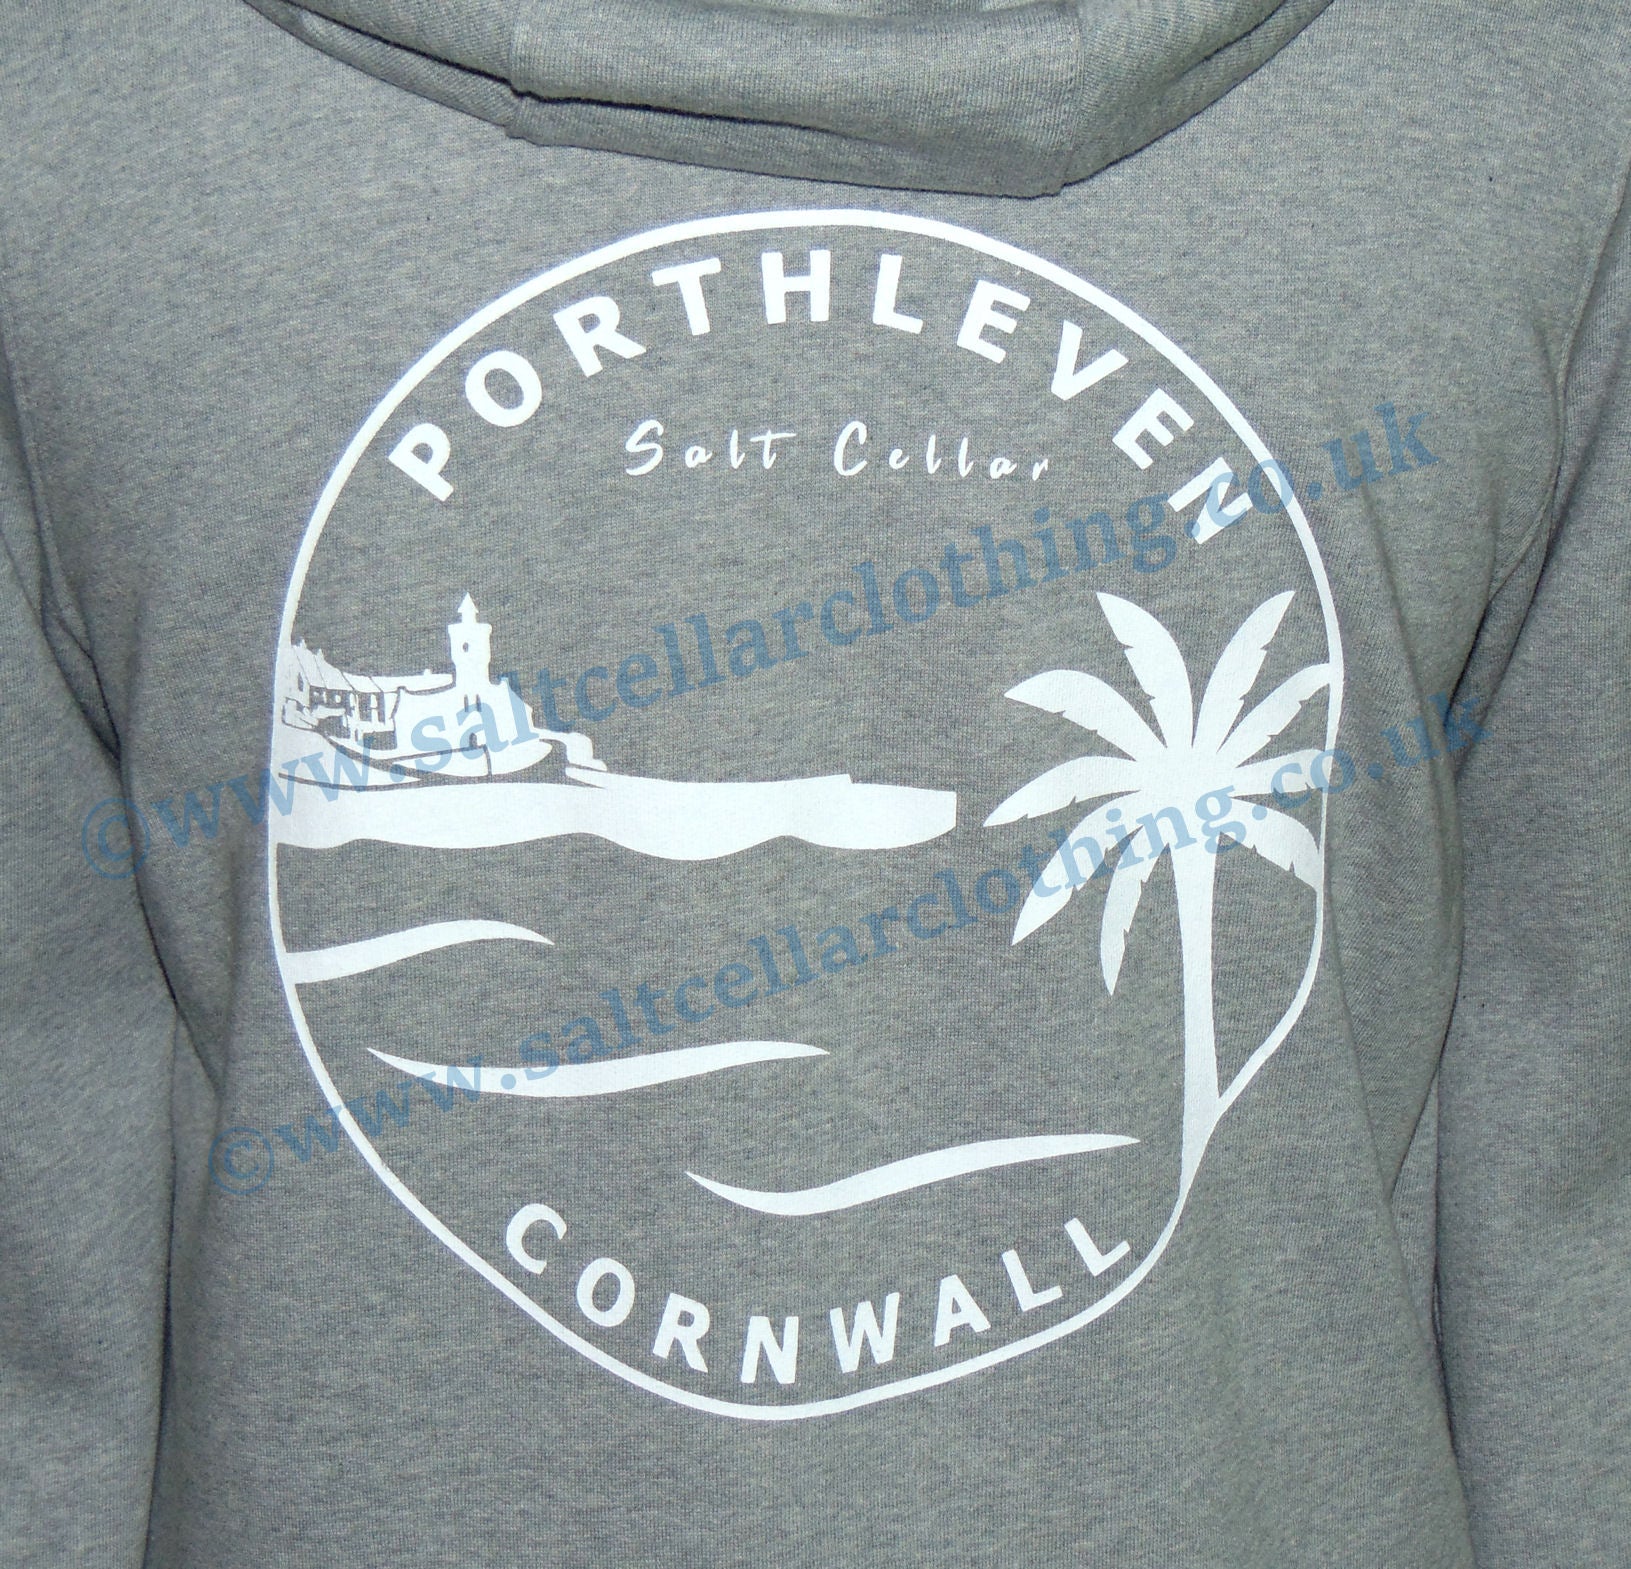 Porthleven Cornwall printed hoody with clock tower and palm tree